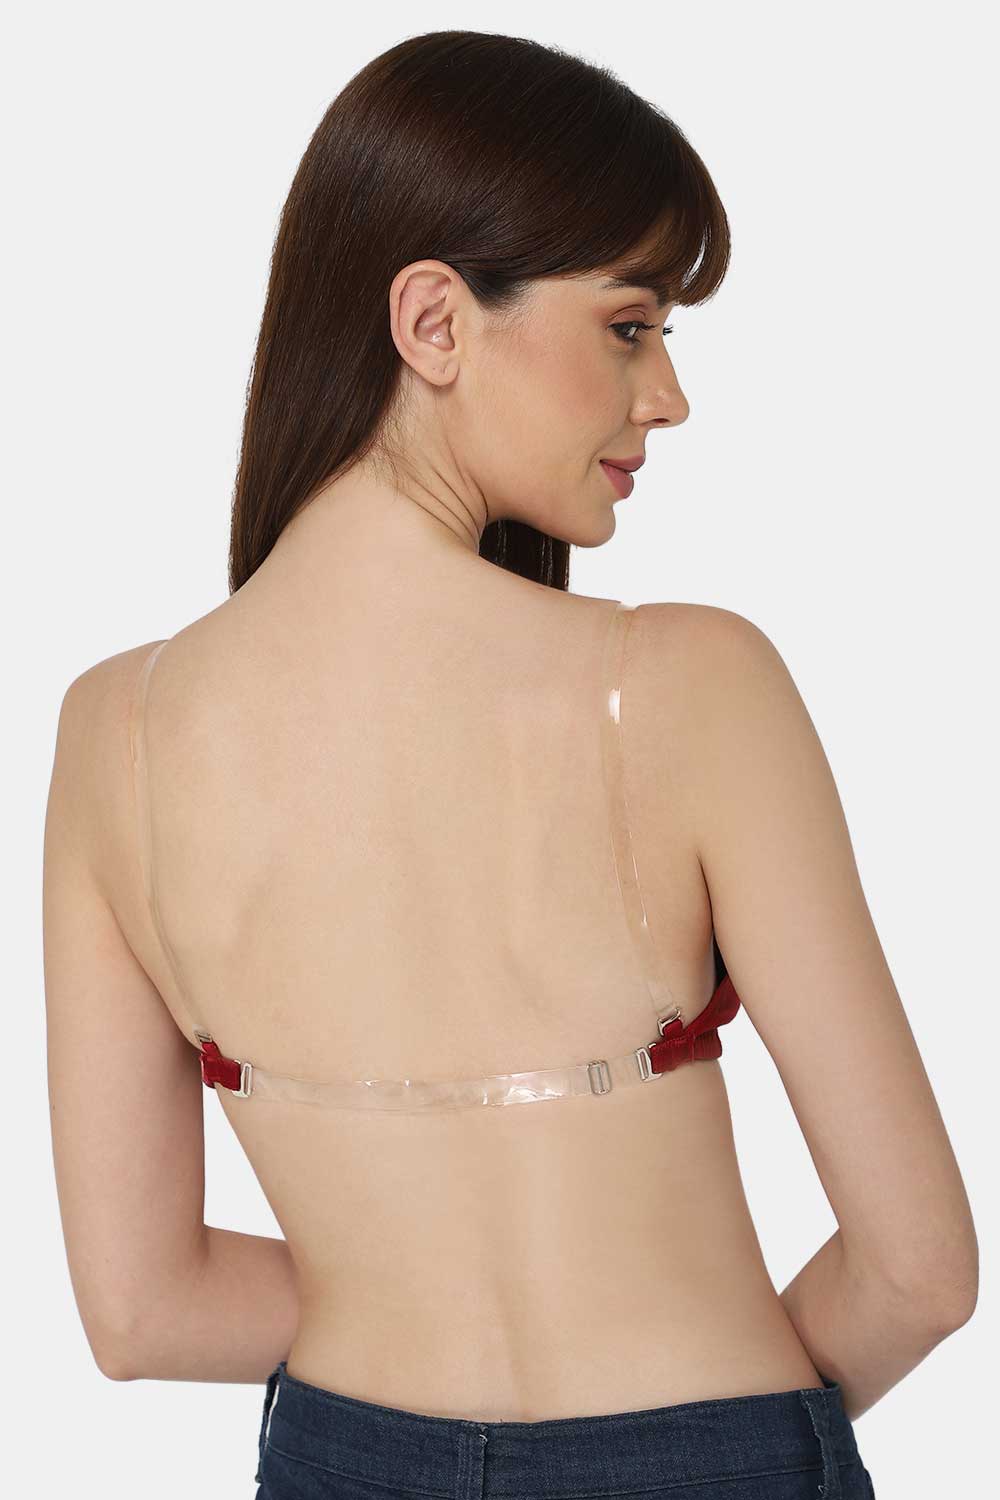 Buy PIFTIF Both Backless and Strapless Padded Bra with Wire (B